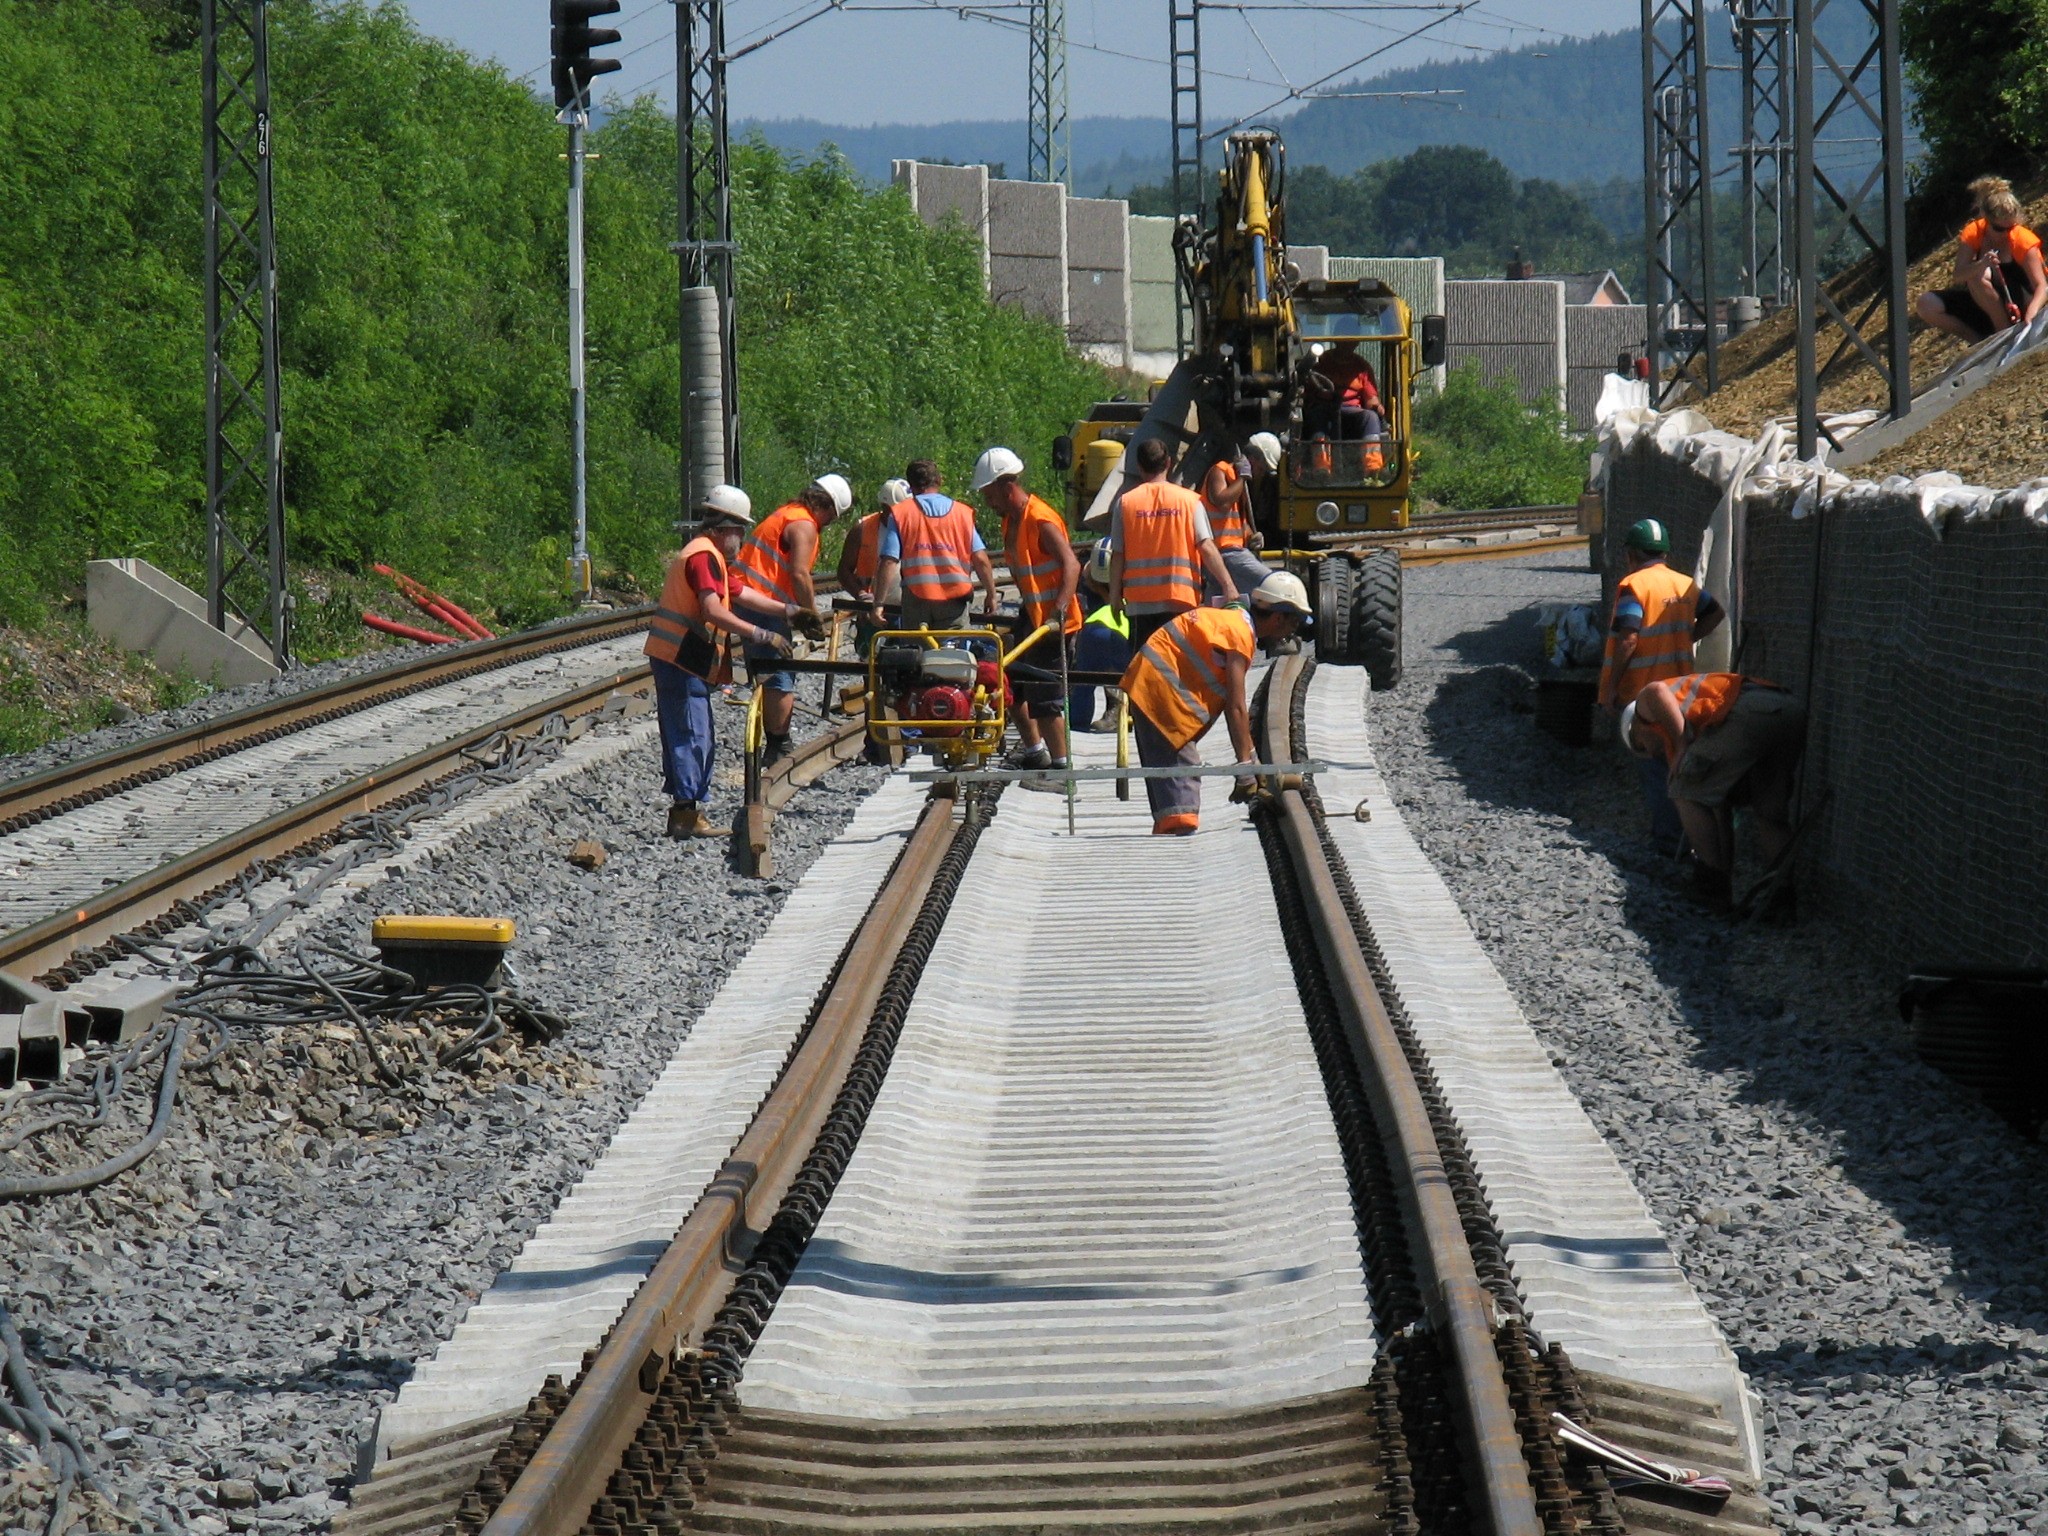 Construction season on the railway is in full swing,but impacts on traffic will be smaller this year